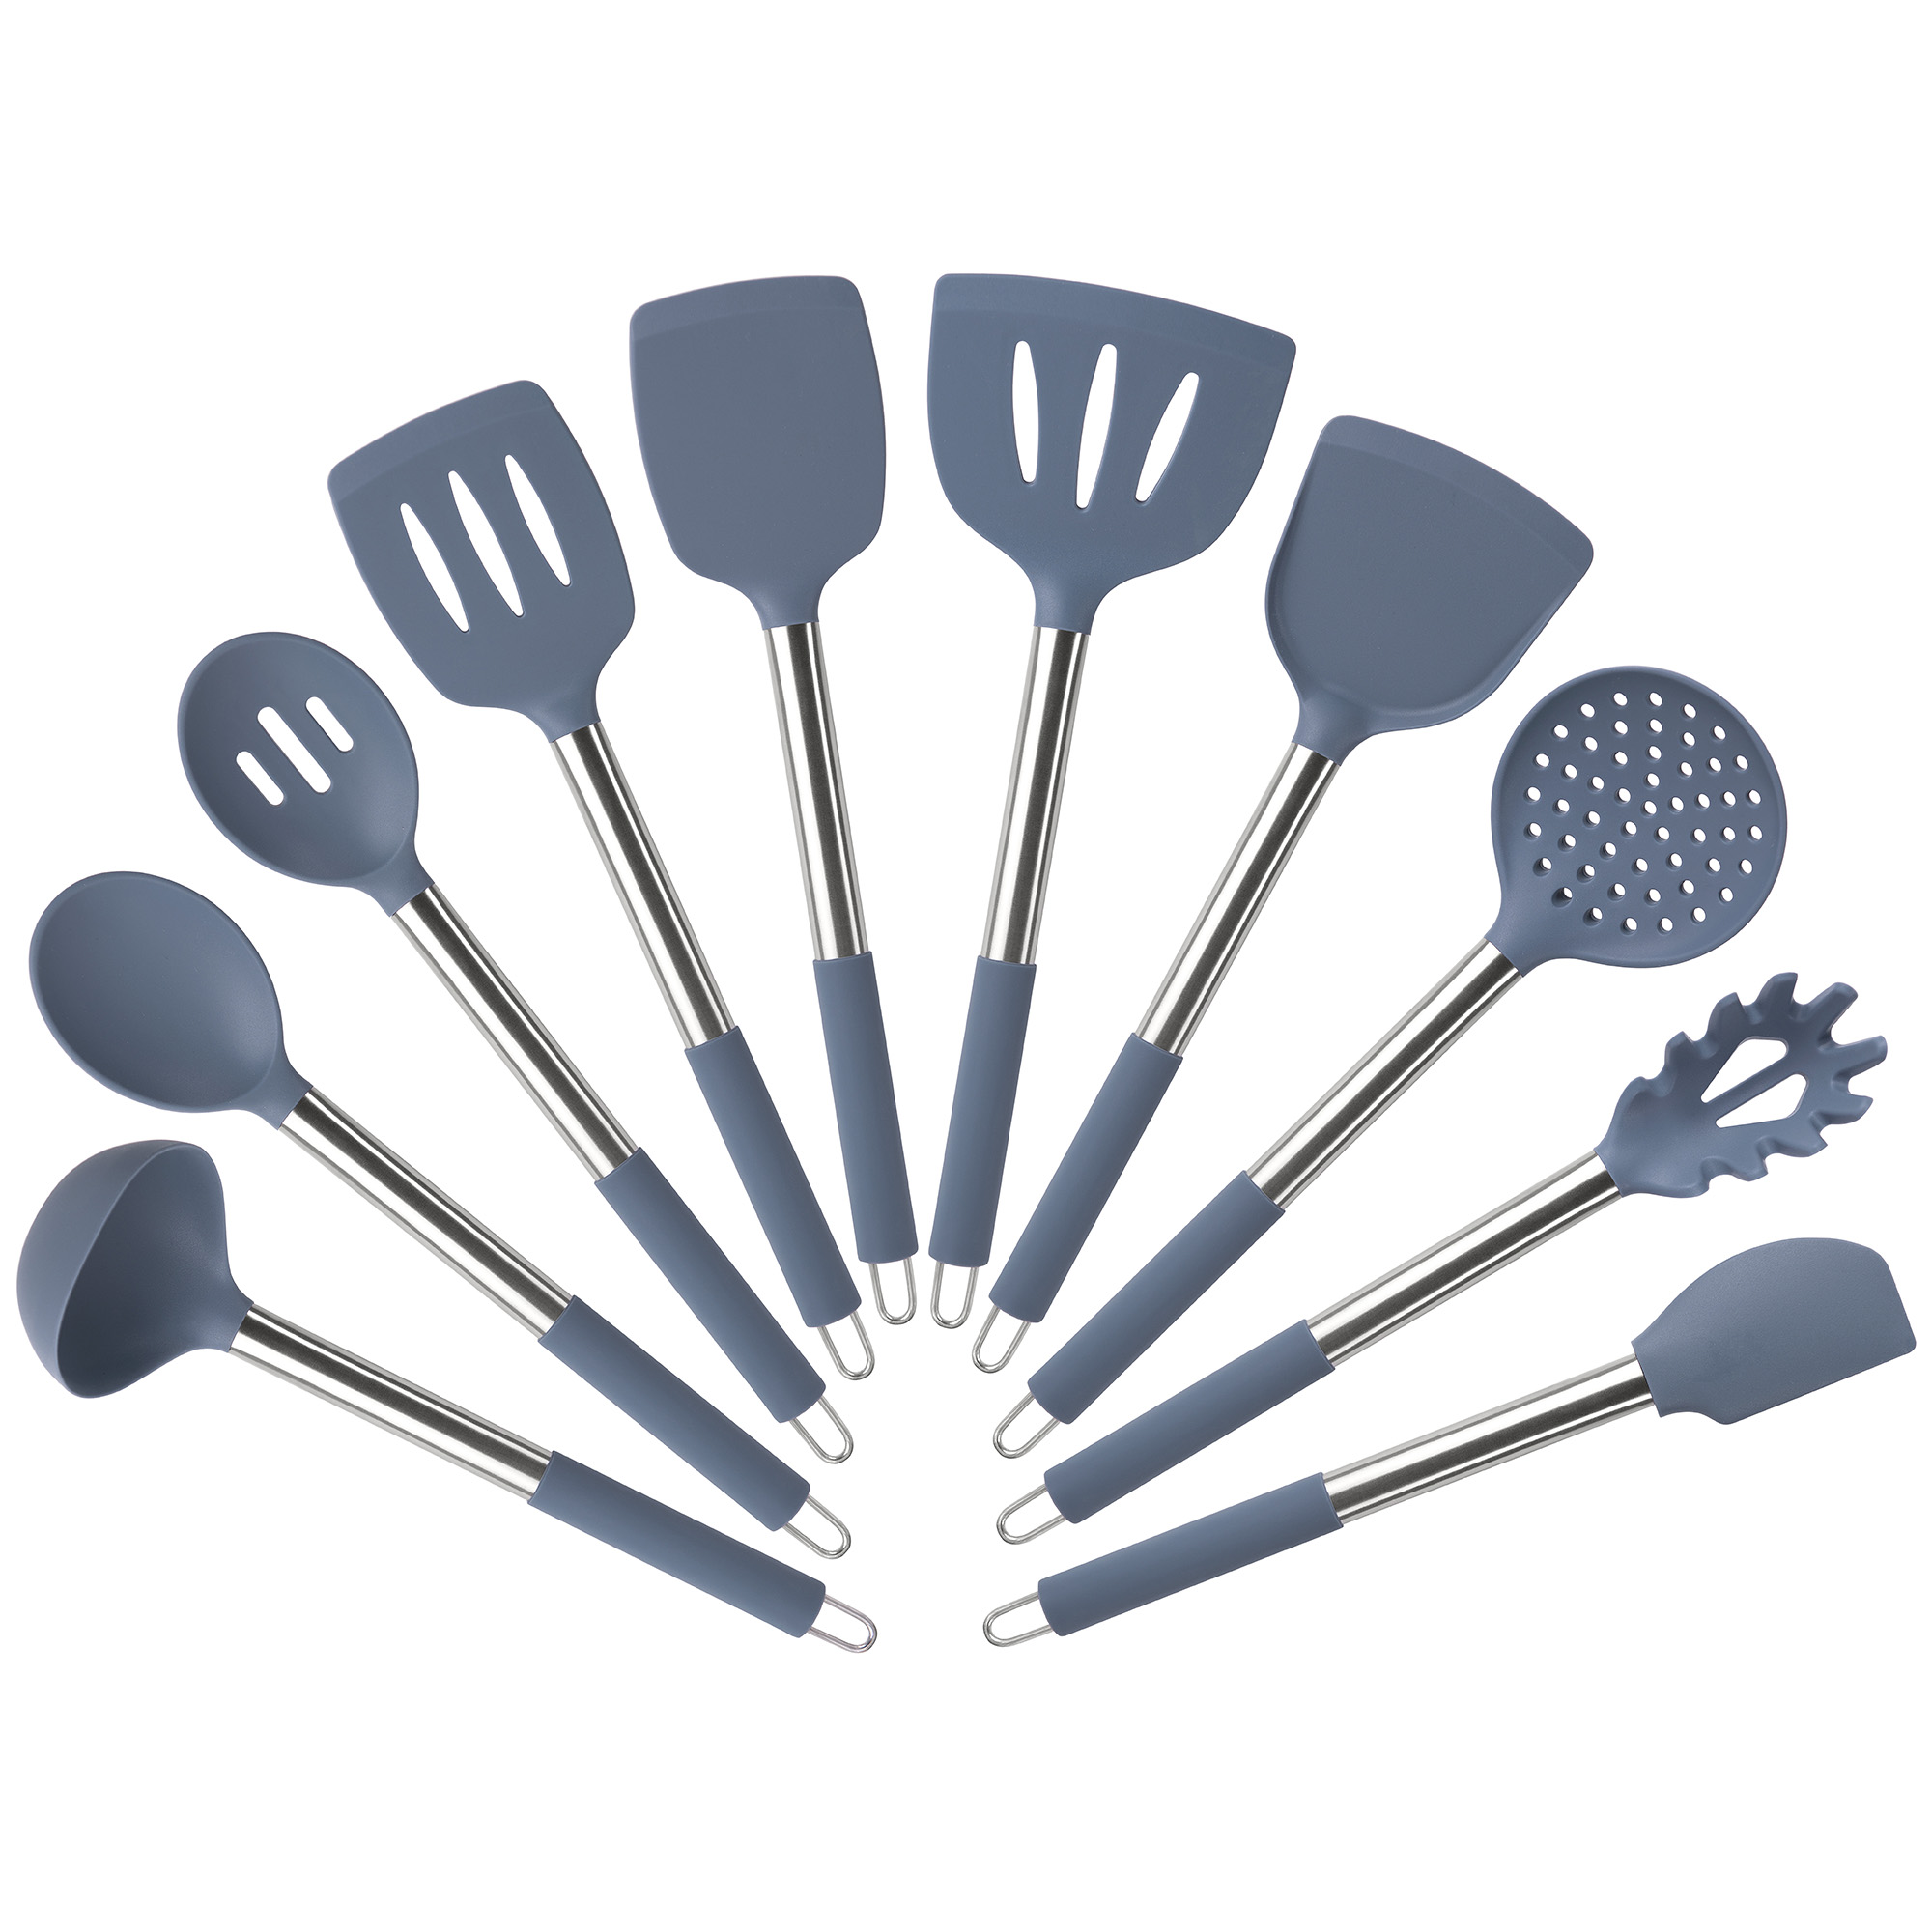 Mainstays 10 Piece Silicone Utensil Set - Blue Moonlight - image 1 of 14